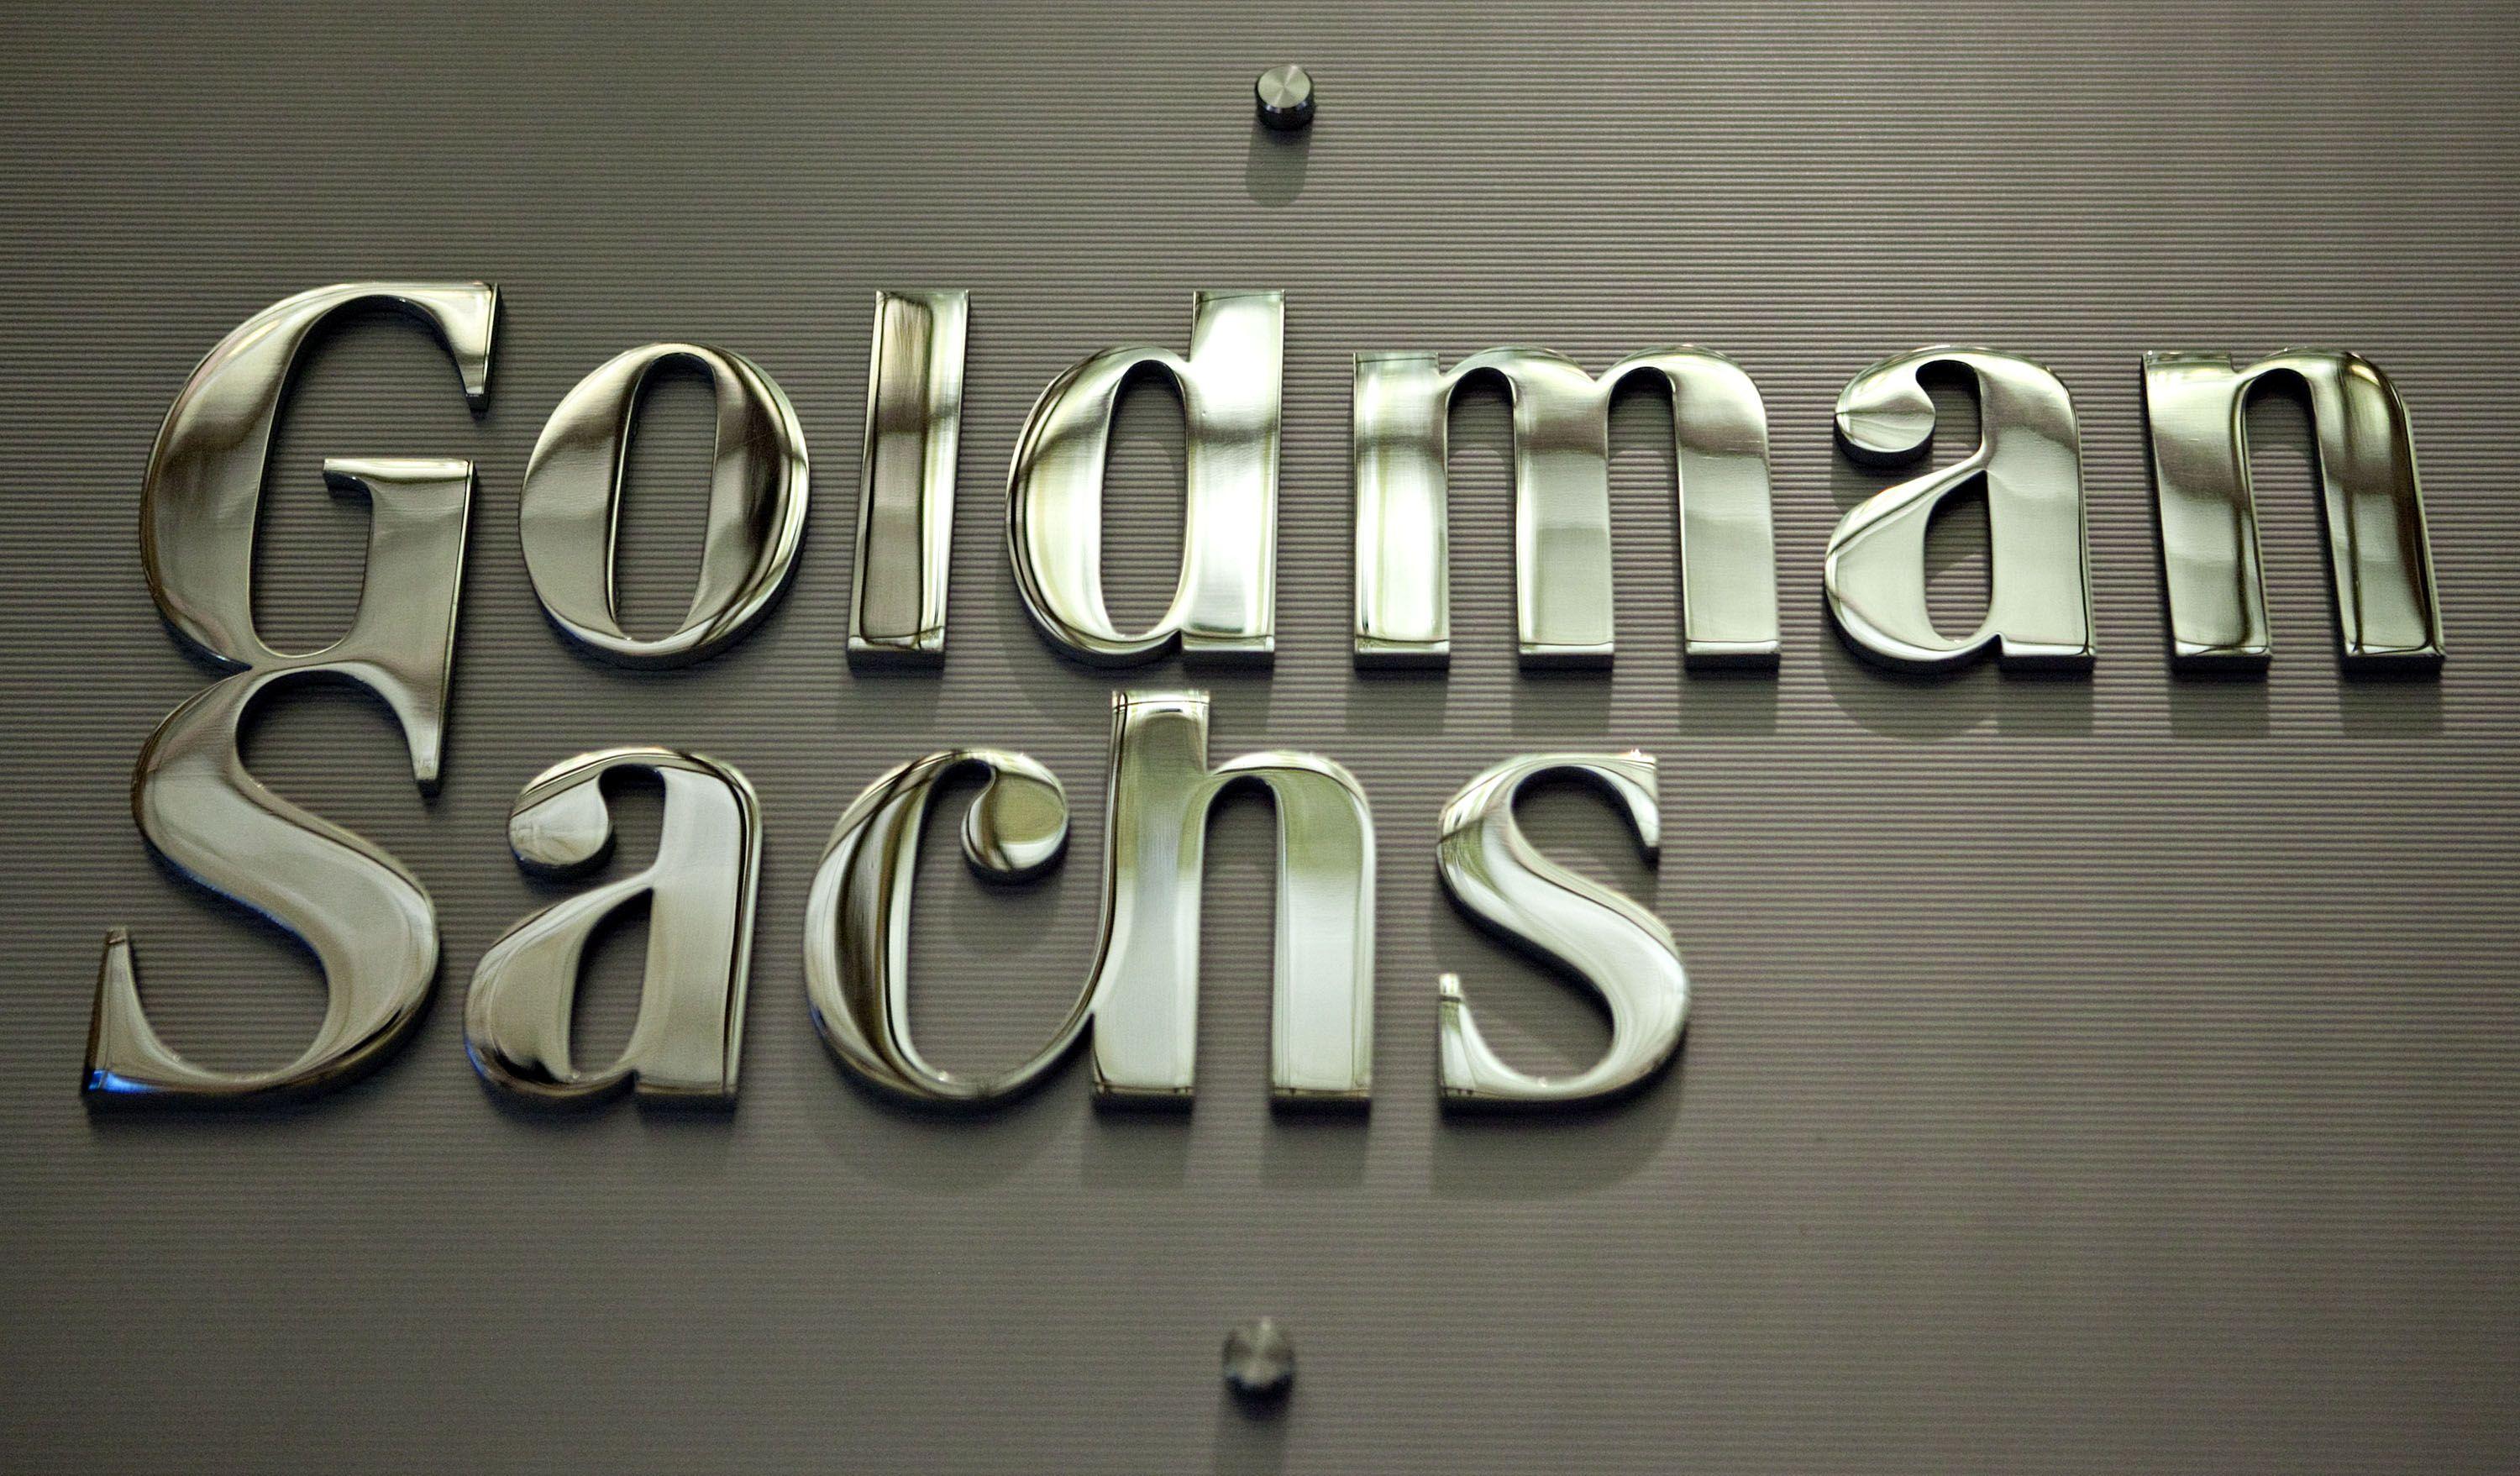 Goldman Sachs Logo - Goldman Sachs Is Eyeing This City For A Post Brexit Move From London